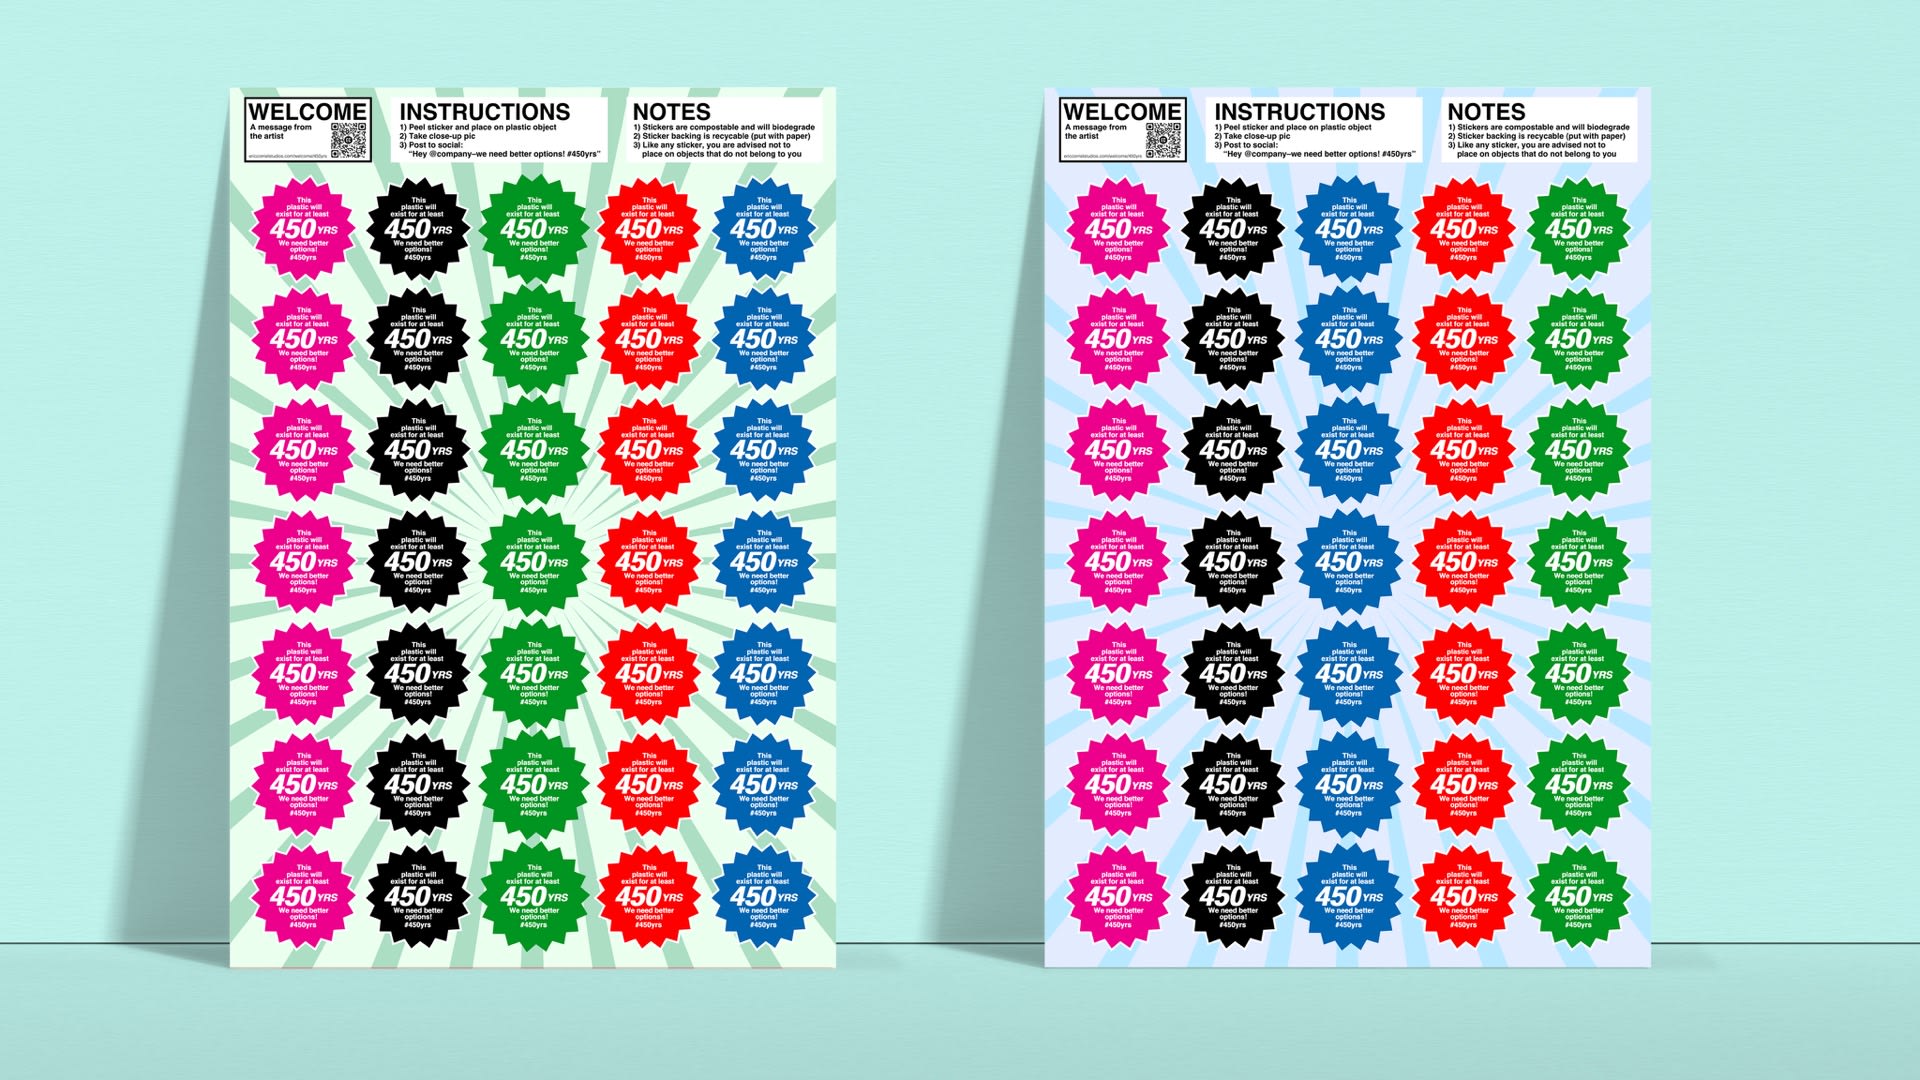 Photograph showing two 8.5 inch by 12.25 inch sticker sheets side by side with different color backgrounds. Each sheet contains 35 starburst shaped stickers that say, 'This plastic will exist for at least 450 YRS. We need better options! #450yrs'